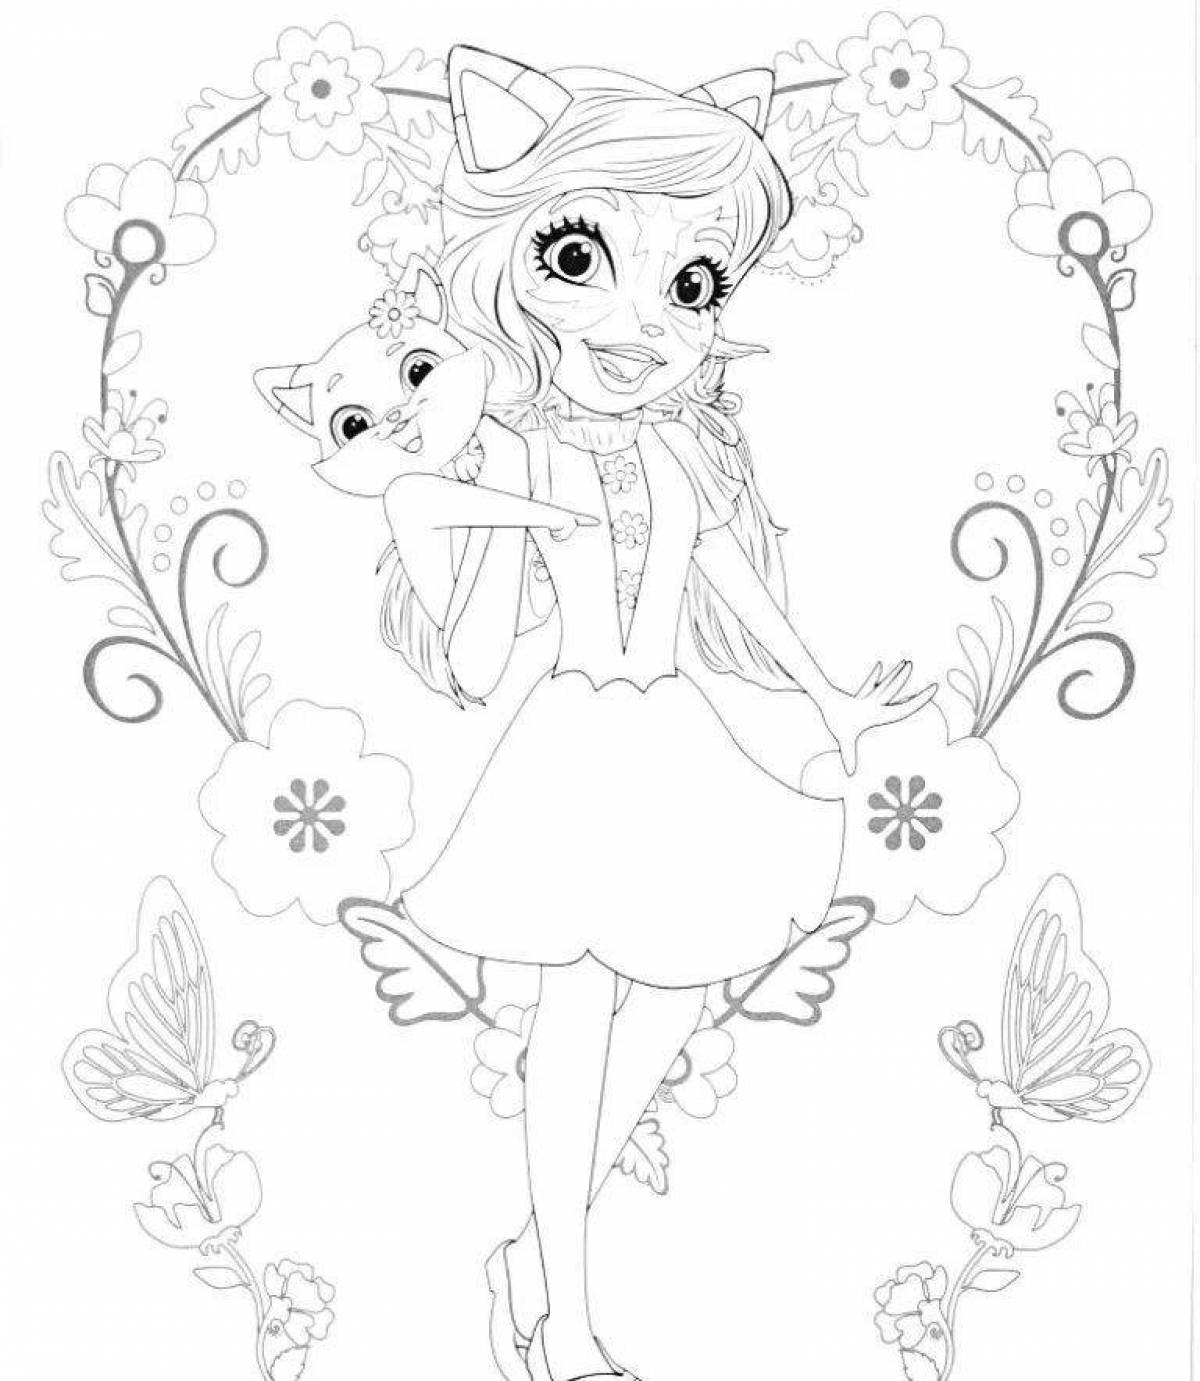 Sparkly enchancimals coloring pages